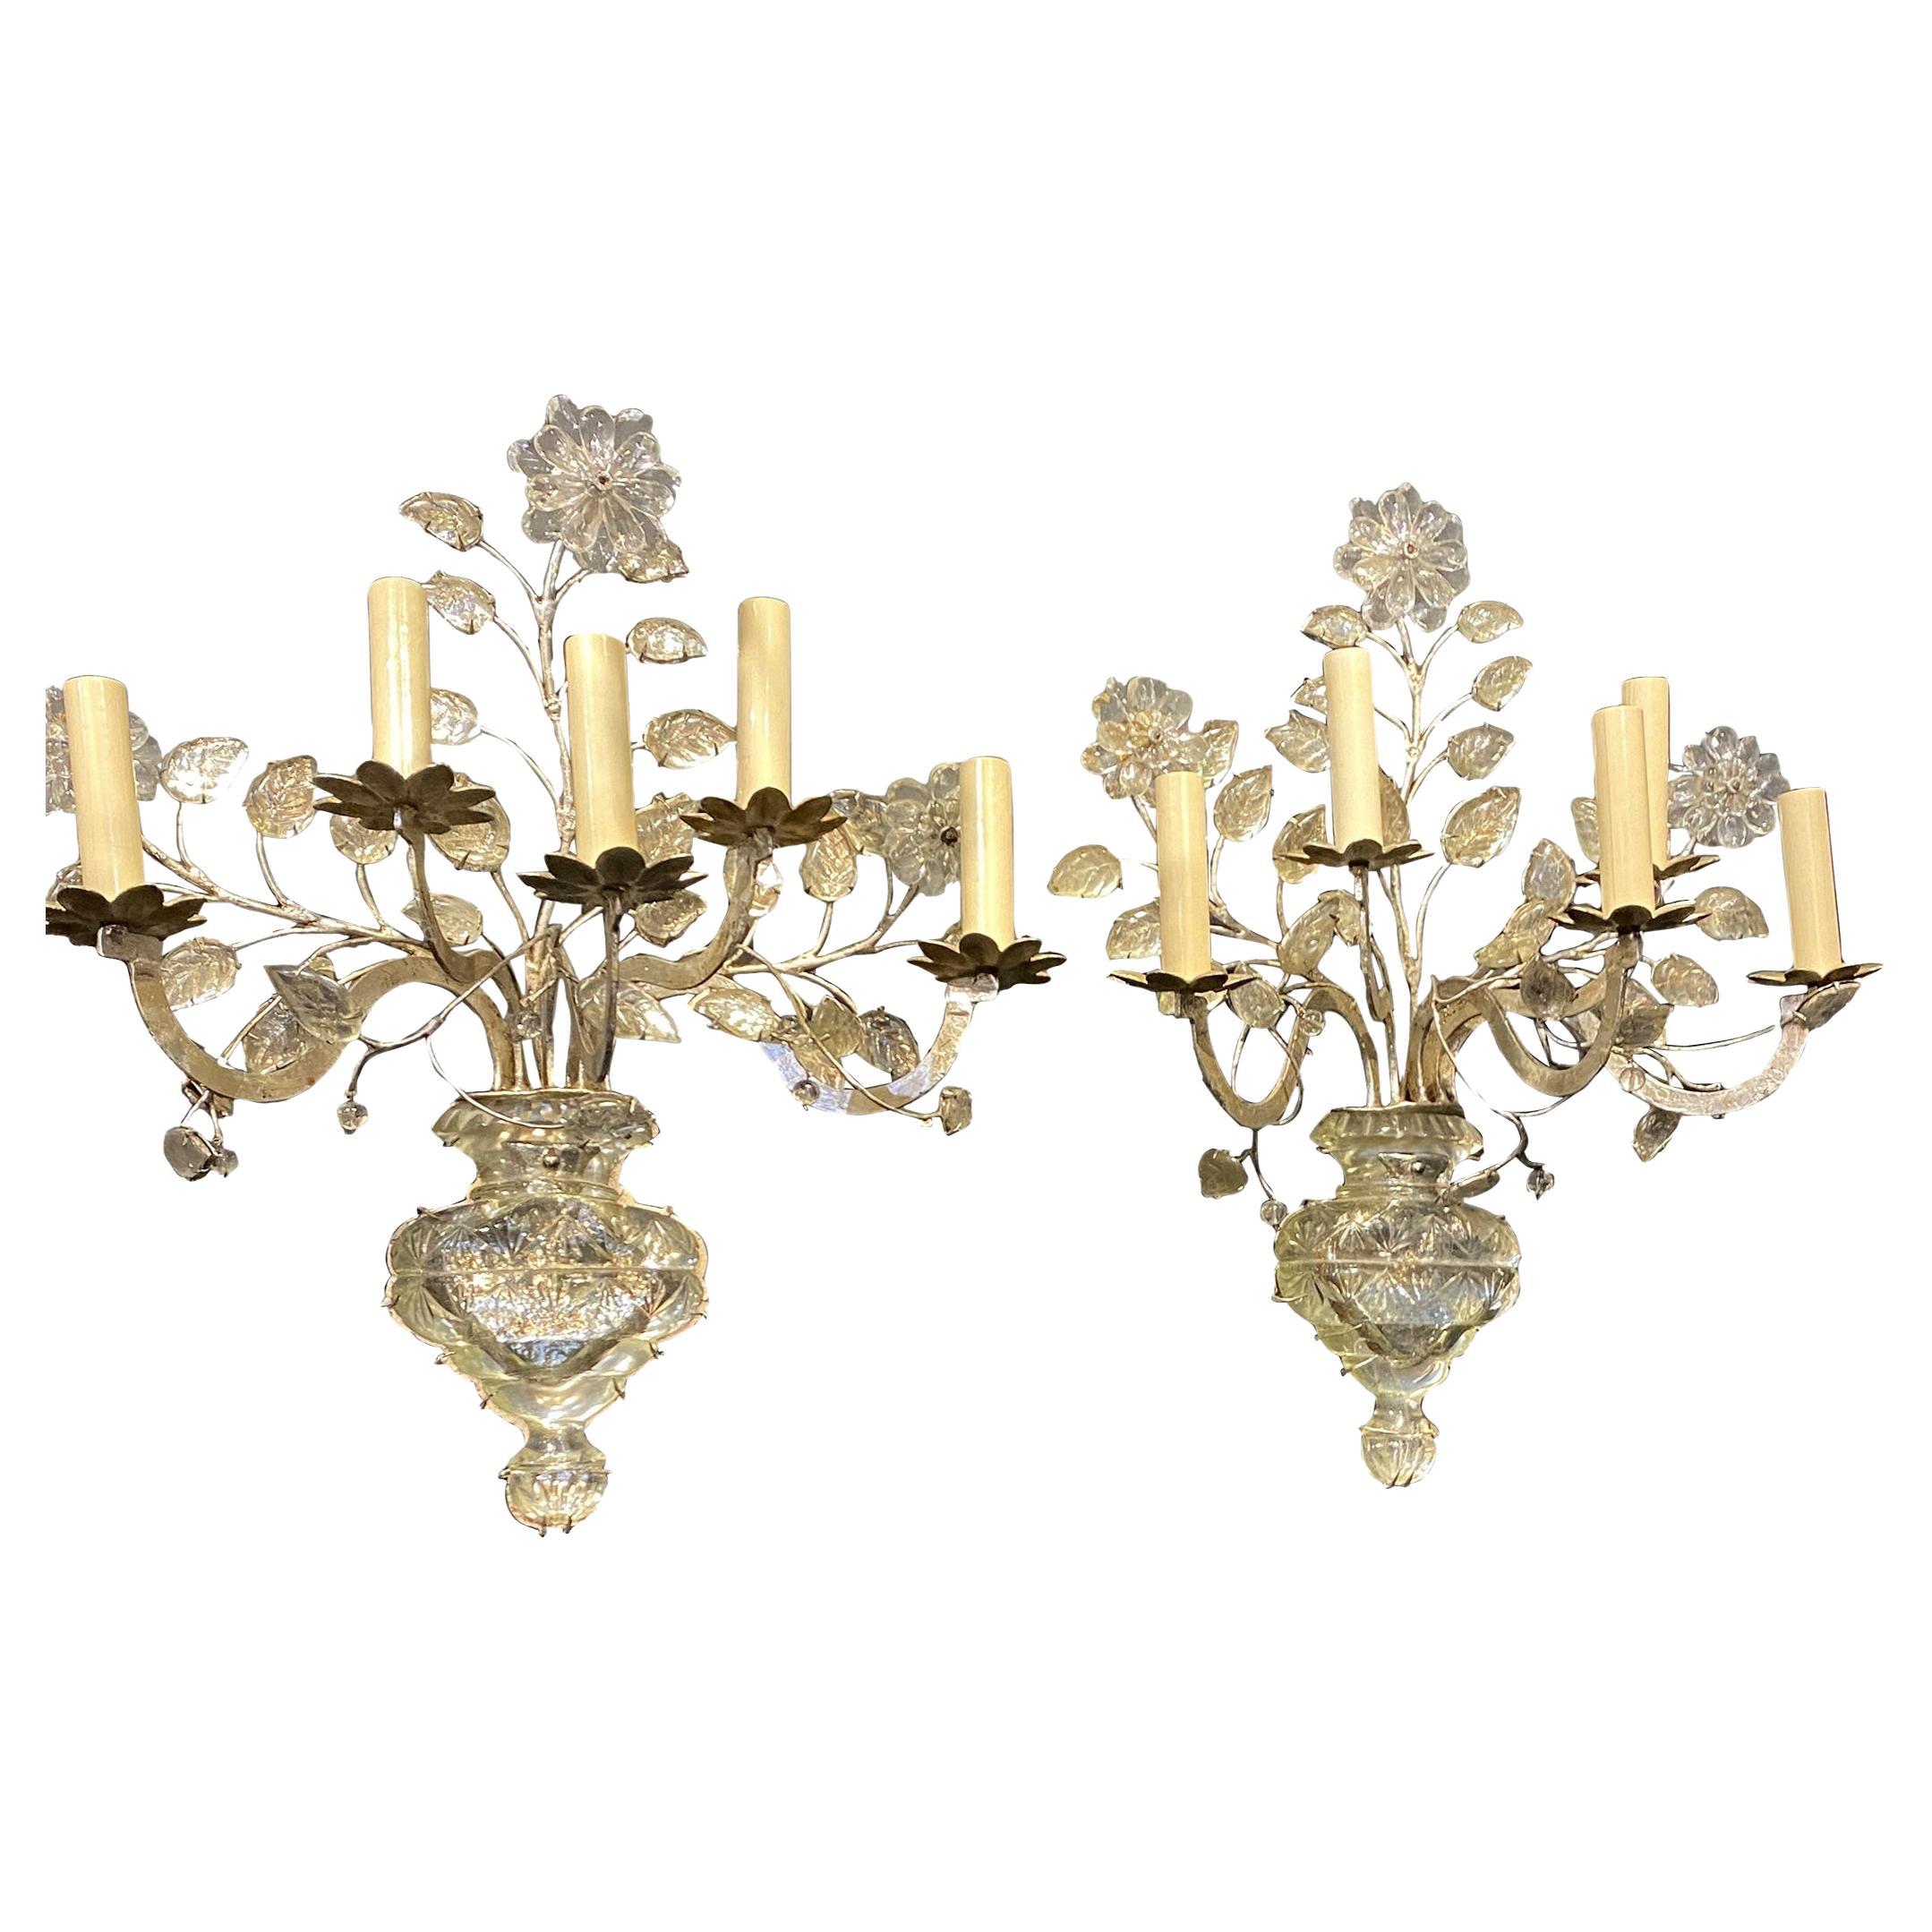 1930's French Bagues Silvered Metal 5 Lights Sconces with Crystals